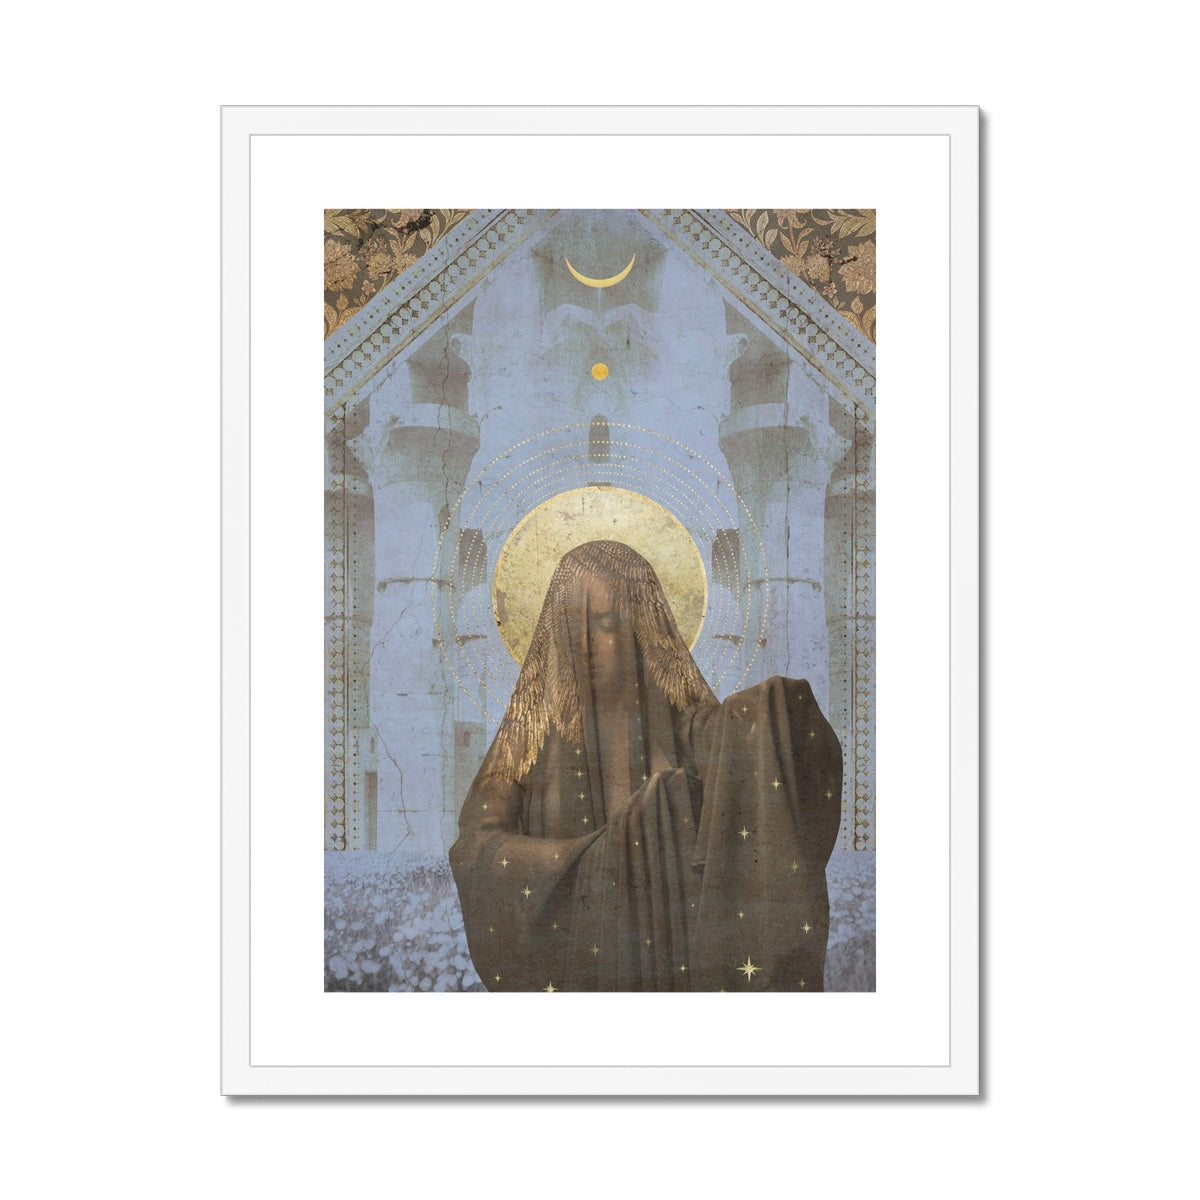 The Mystic Framed & Mounted Print - Starseed Designs Inc.